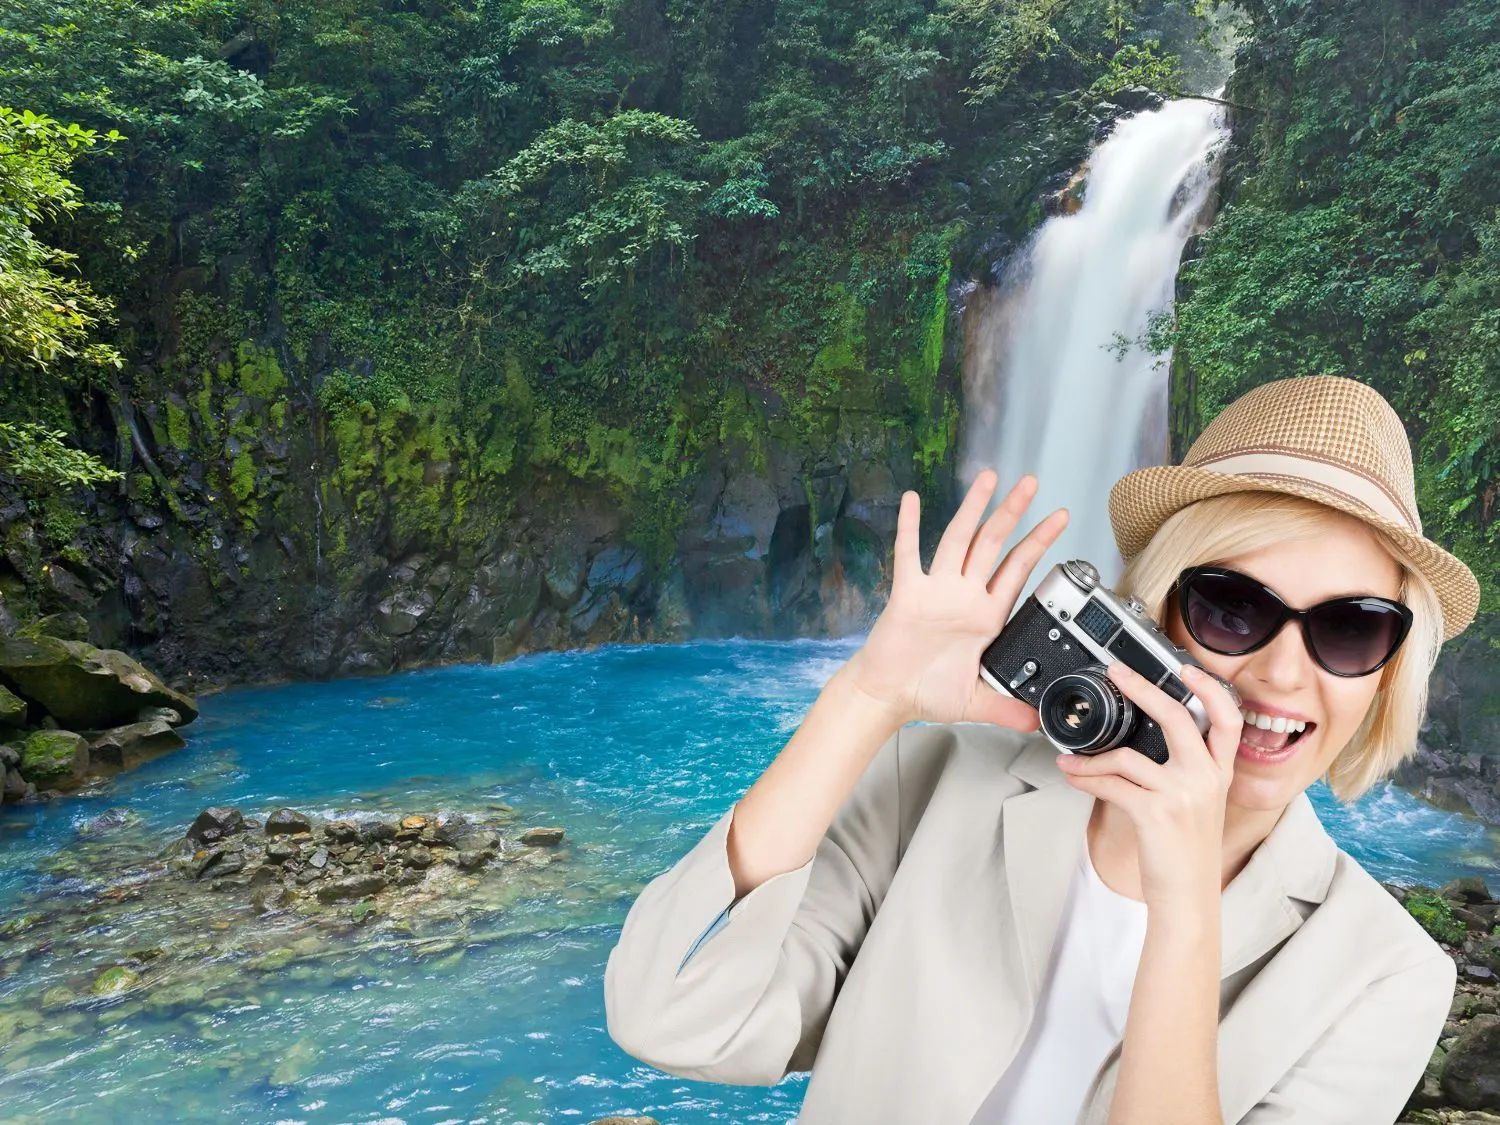 The 6 Best Costa Rica Tours For Unforgettable Adventures That Are Achievable & Affordable!